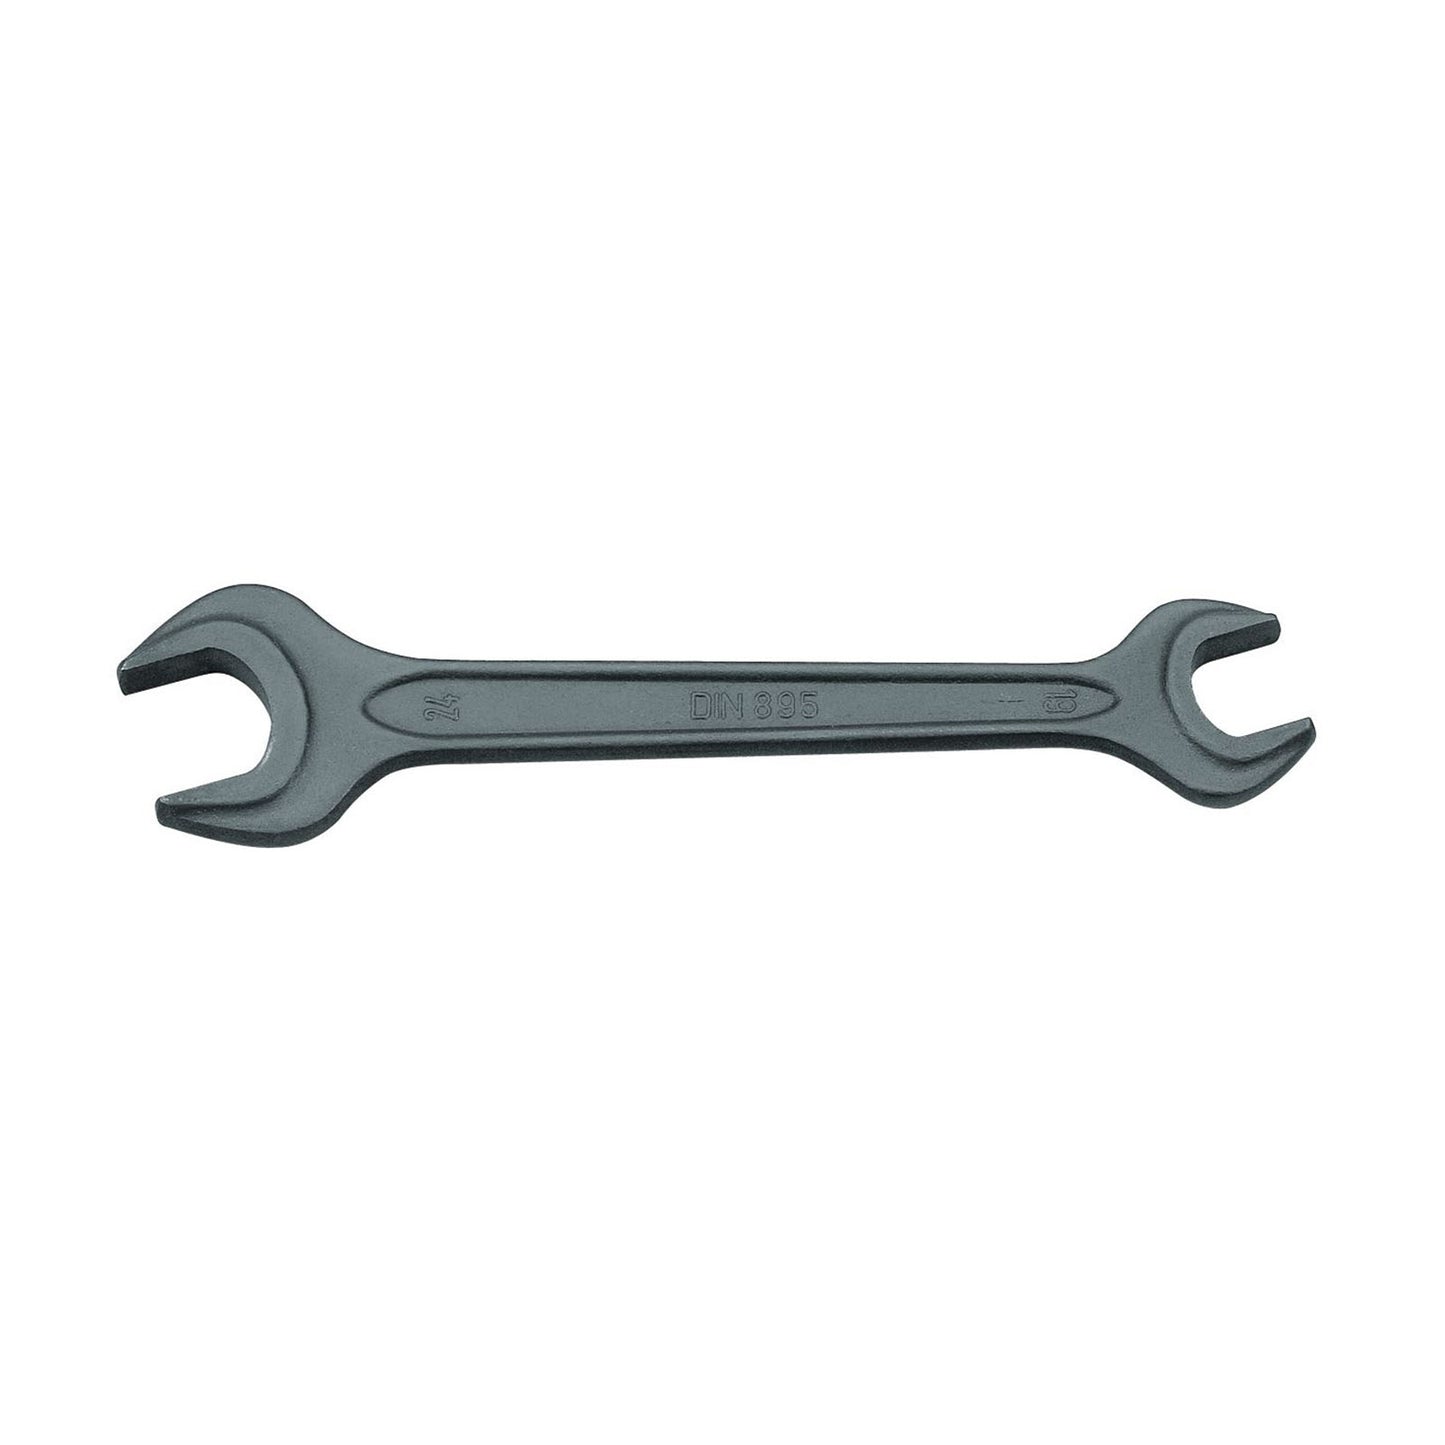 GEDORE 895 9X11 - 2-Mount Fixed Wrench, 9x11 (6584640)